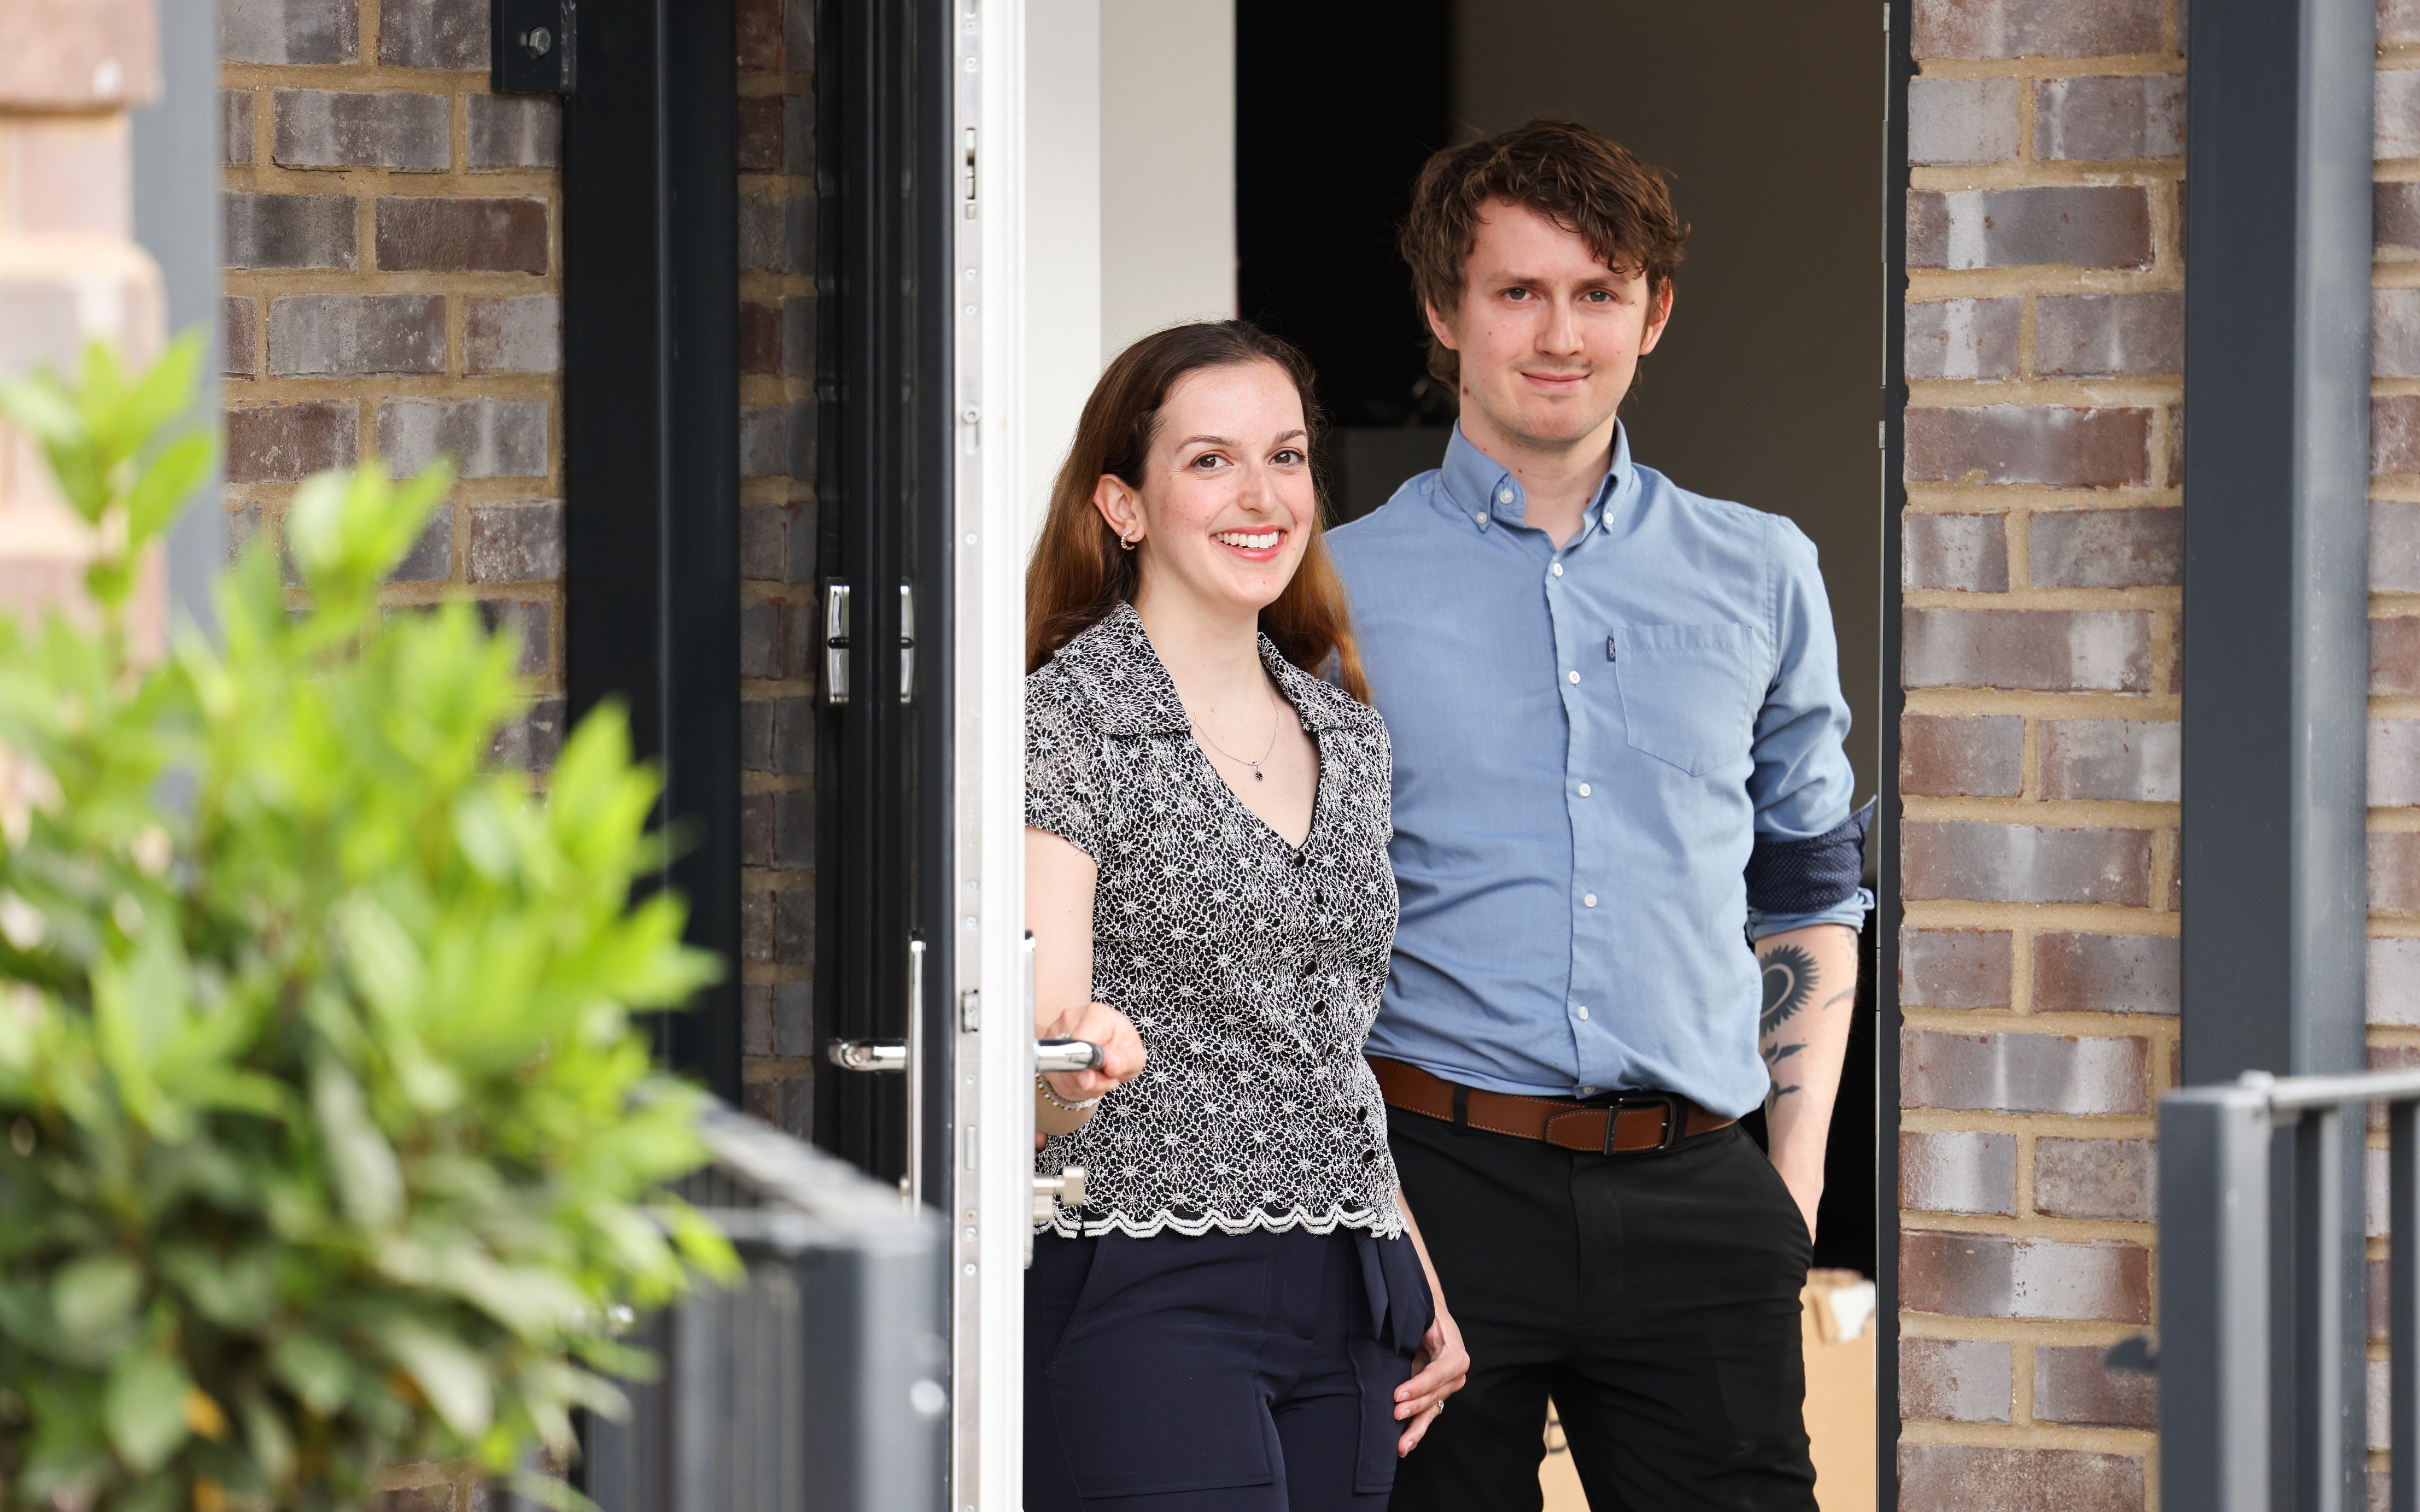 New 1% deposit scheme launched for first-time buyers in London